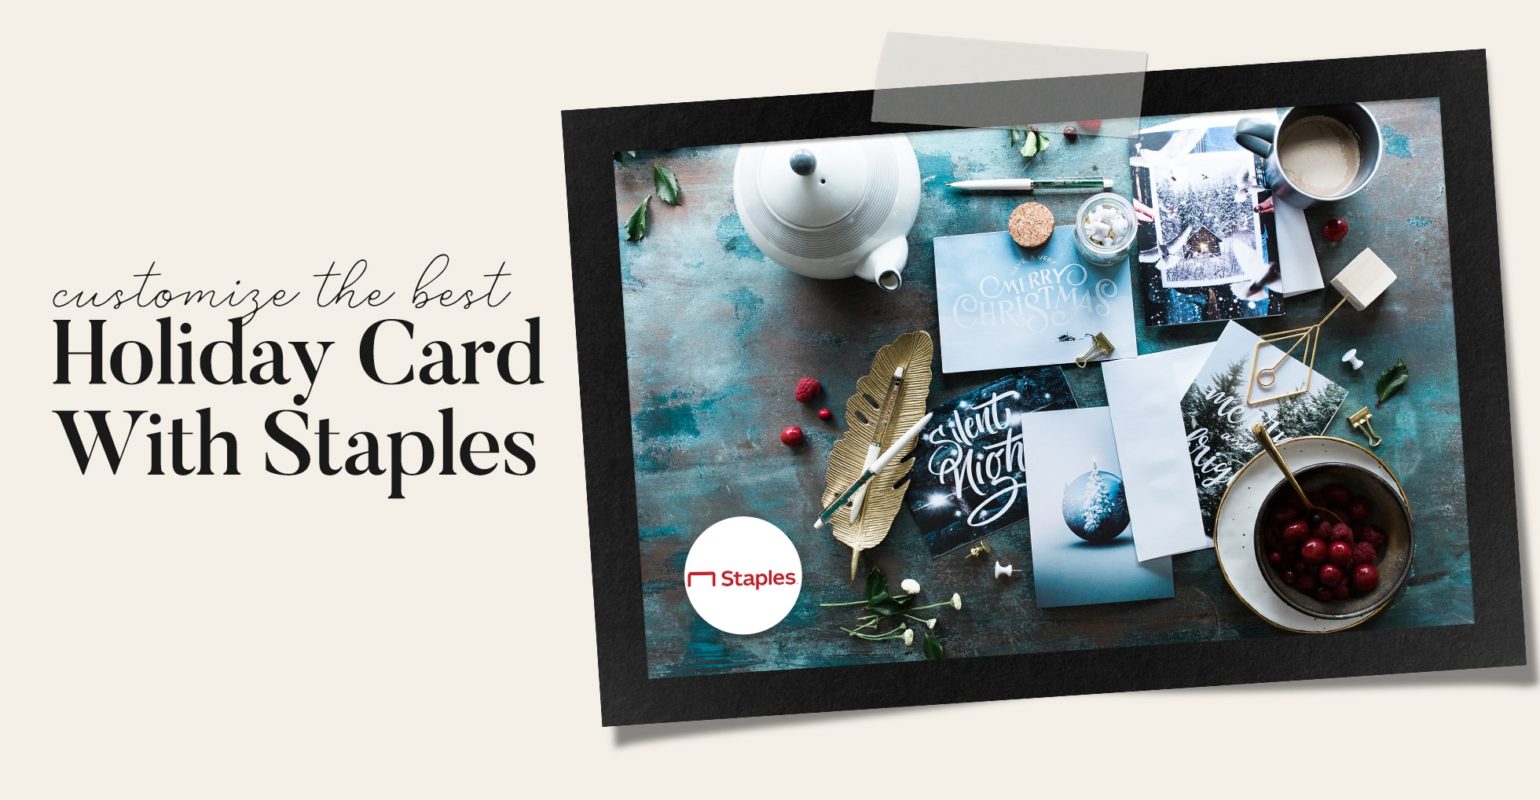 Customize The Best Holiday Card This Year! [Staples]